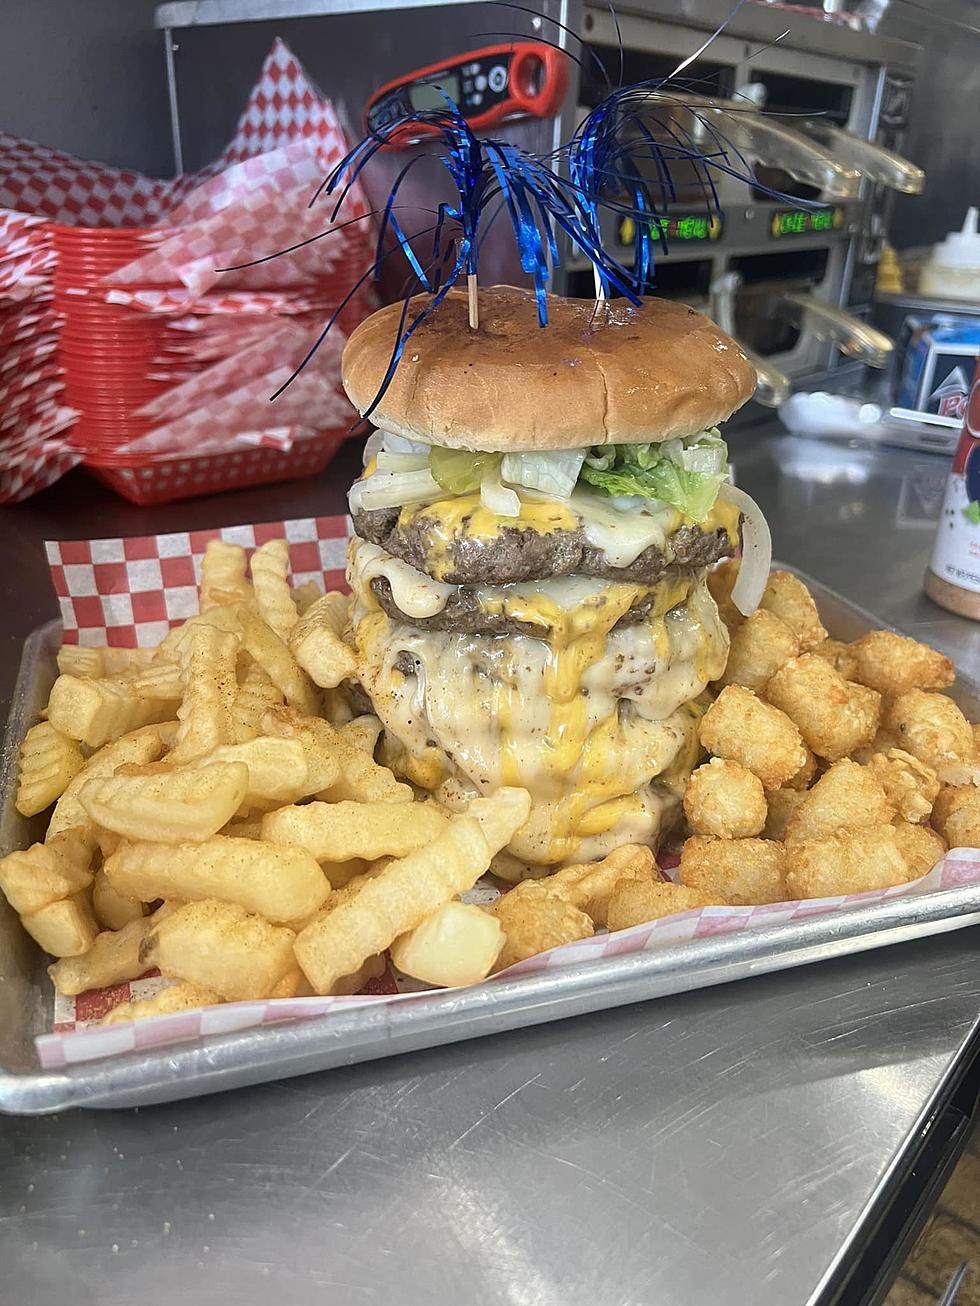 Check Out This Epic Burger Challenge in Victoria, Texas